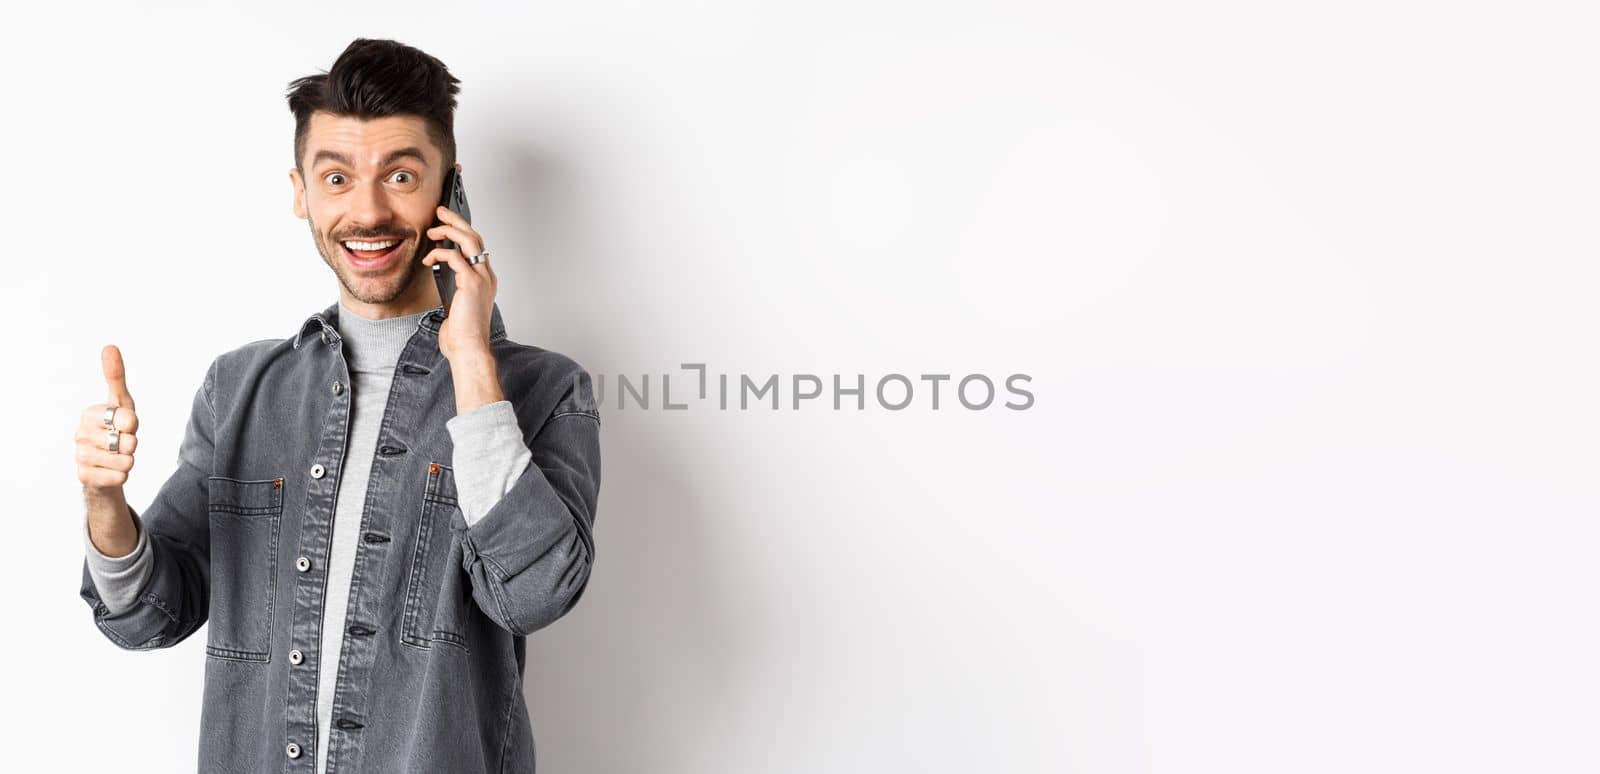 Excited young man talking on phone and showing thumbs up, smiling satisfied, standing against white background.